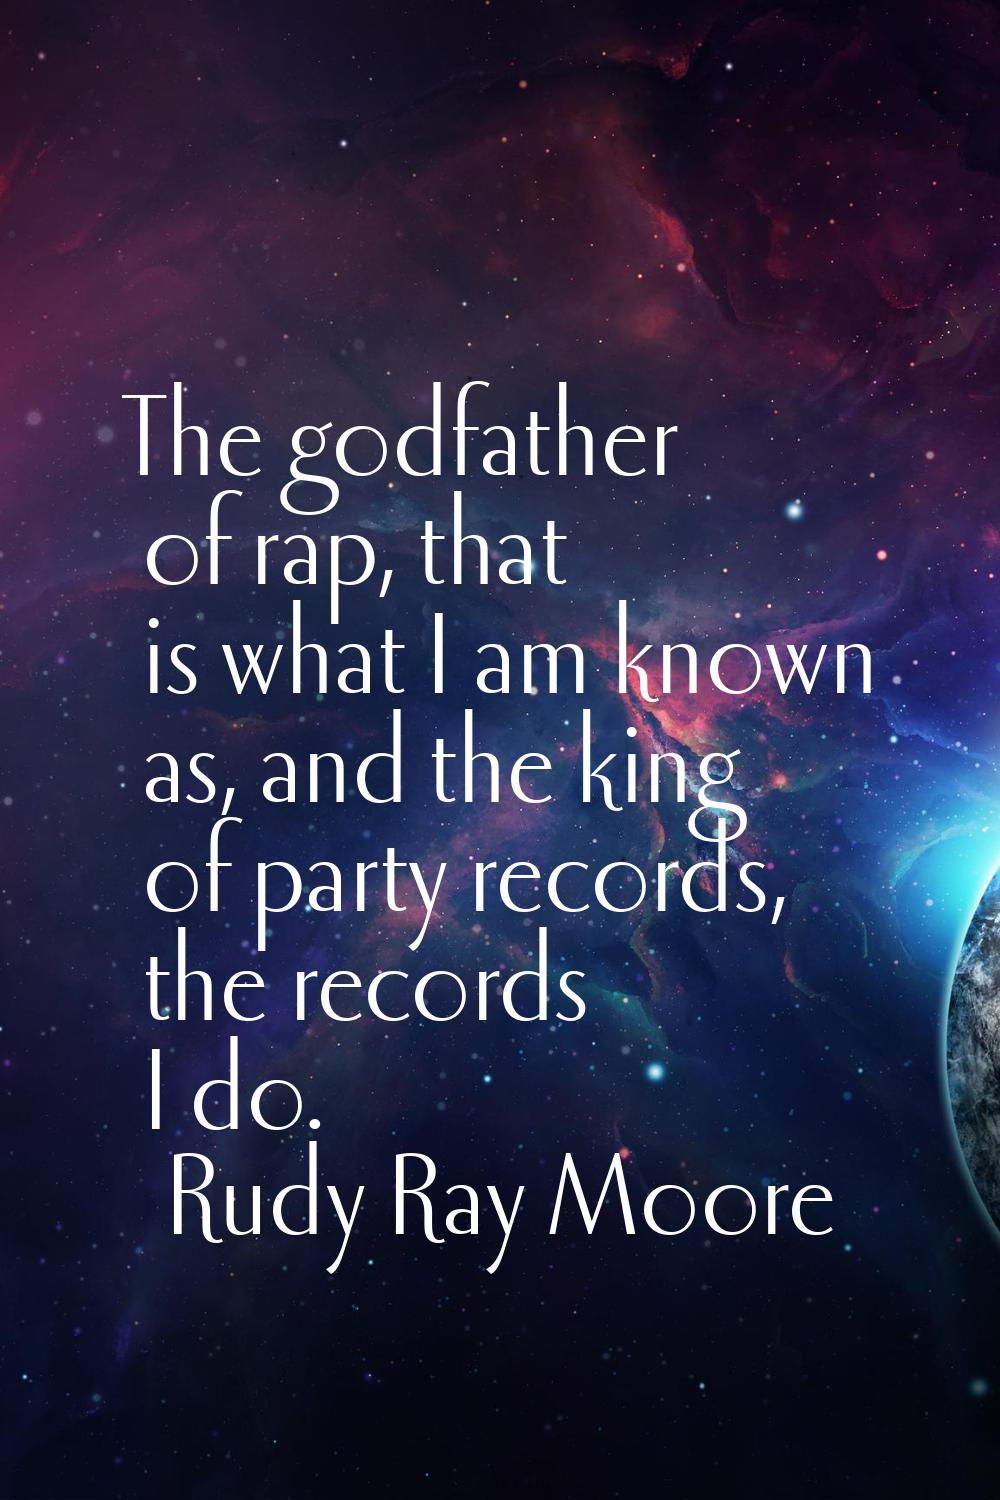 The godfather of rap, that is what I am known as, and the king of party records, the records I do.